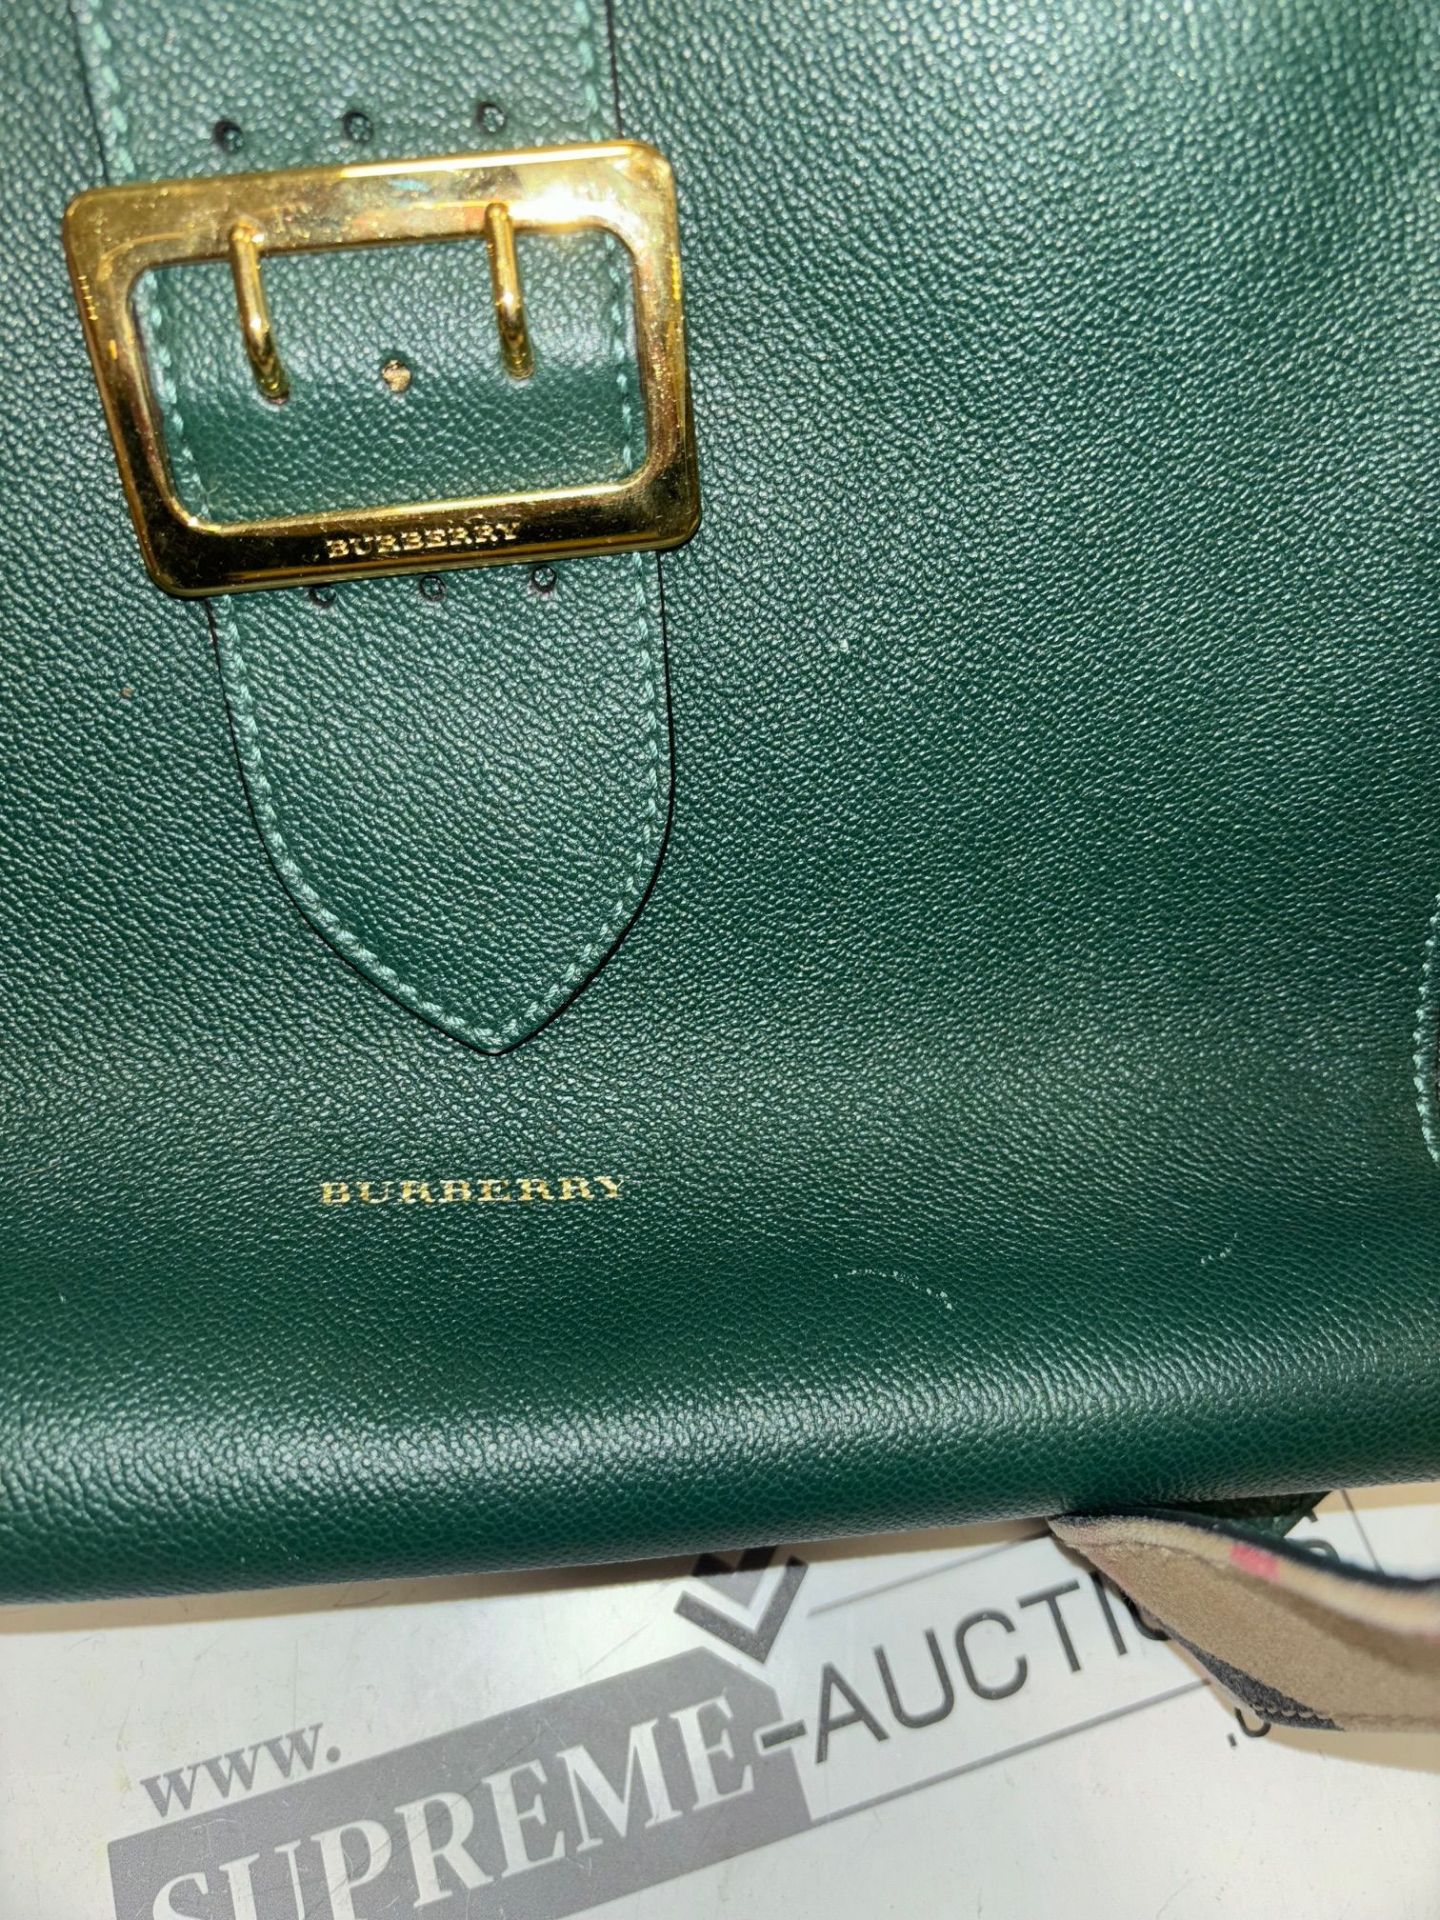 Burberry Green Buckle Tote Leather. 40x25cm. - Image 6 of 11